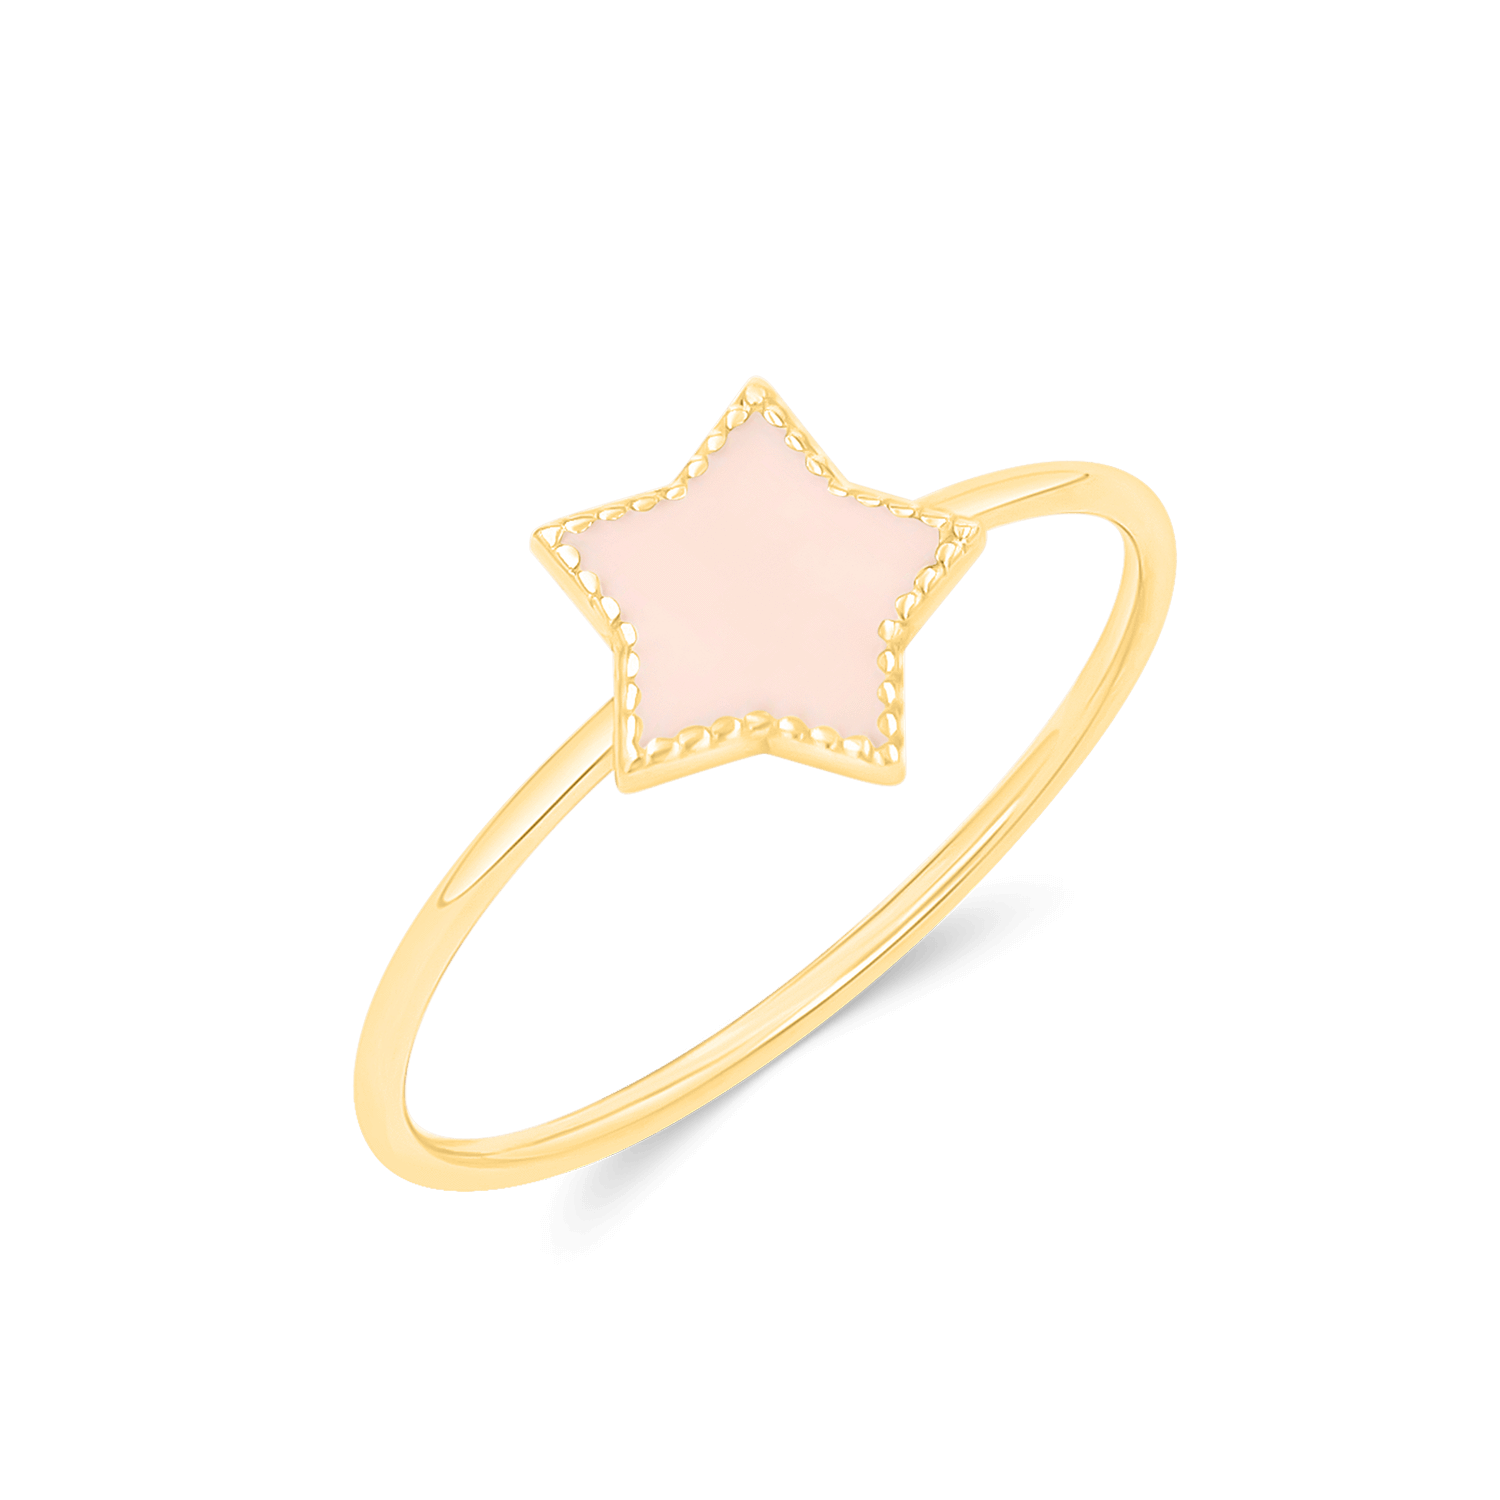 The Nia Moon & Star Ring- Diamond Jewellery at Best Prices in India |  SarvadaJewels.com